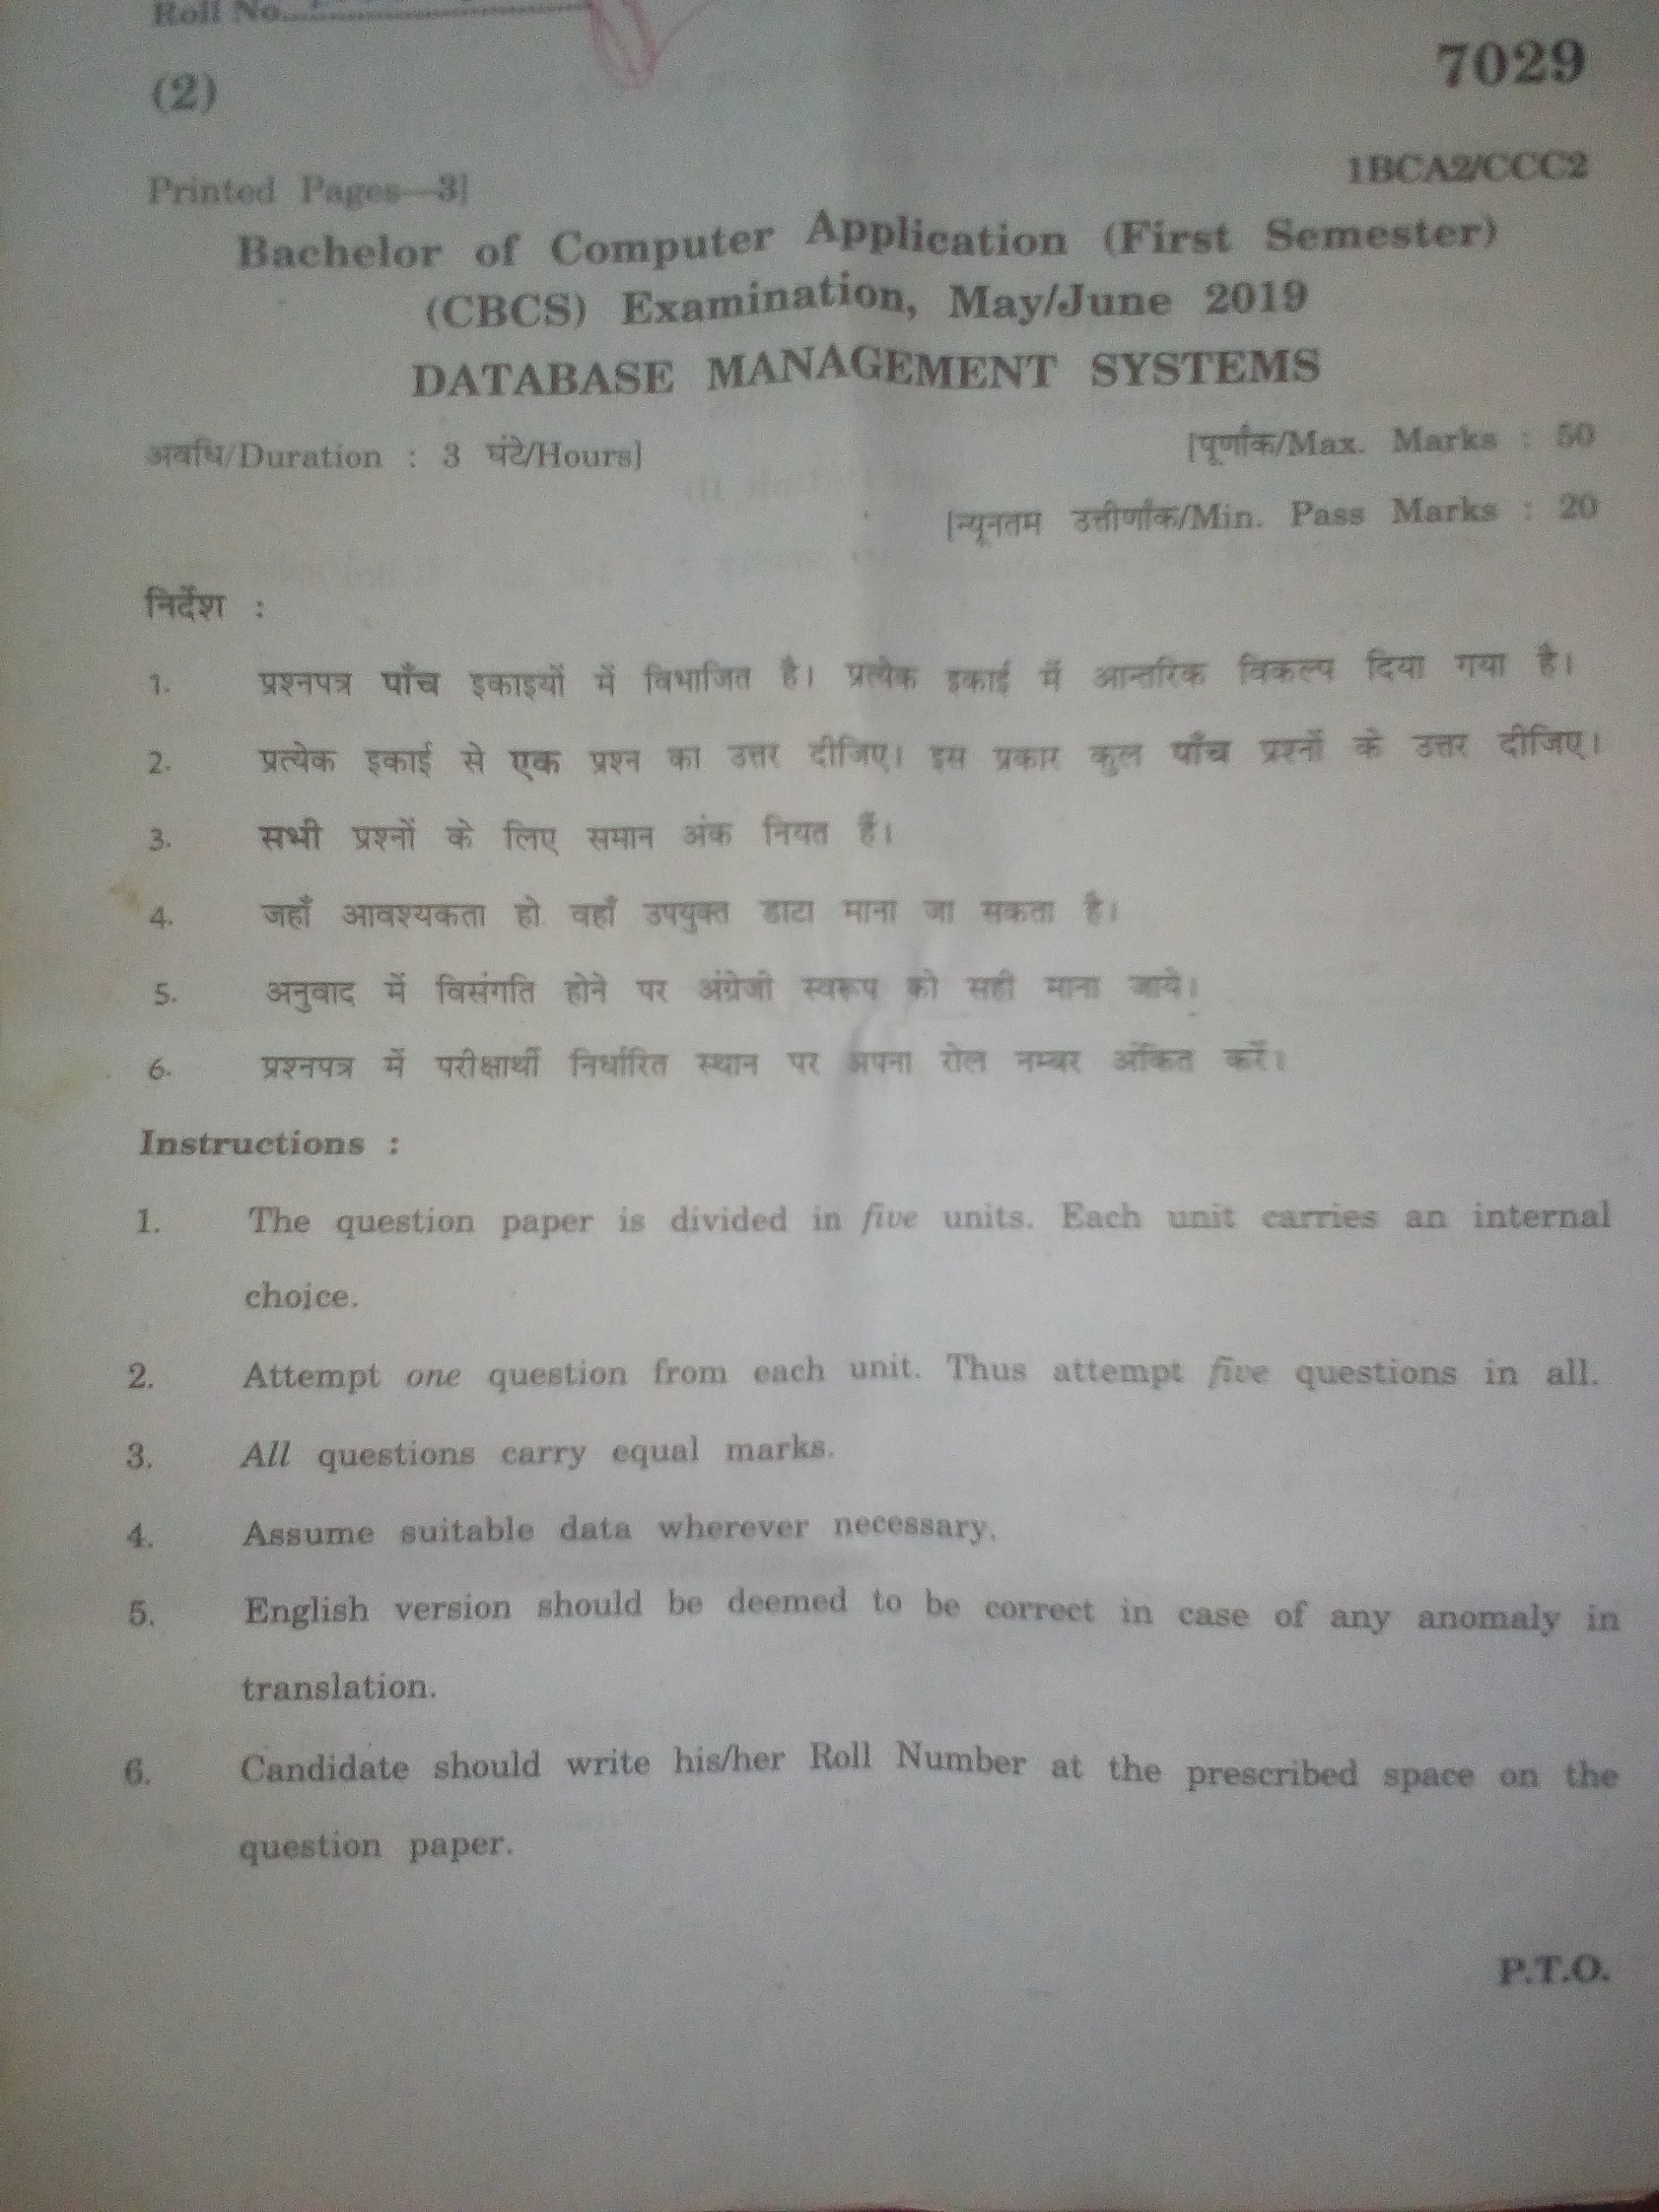 Database management System (DBMS) (First semester paper) Makhanlal chaturvedi national and jounalism university,Bhopal-IMG_20190923_162606.jpg